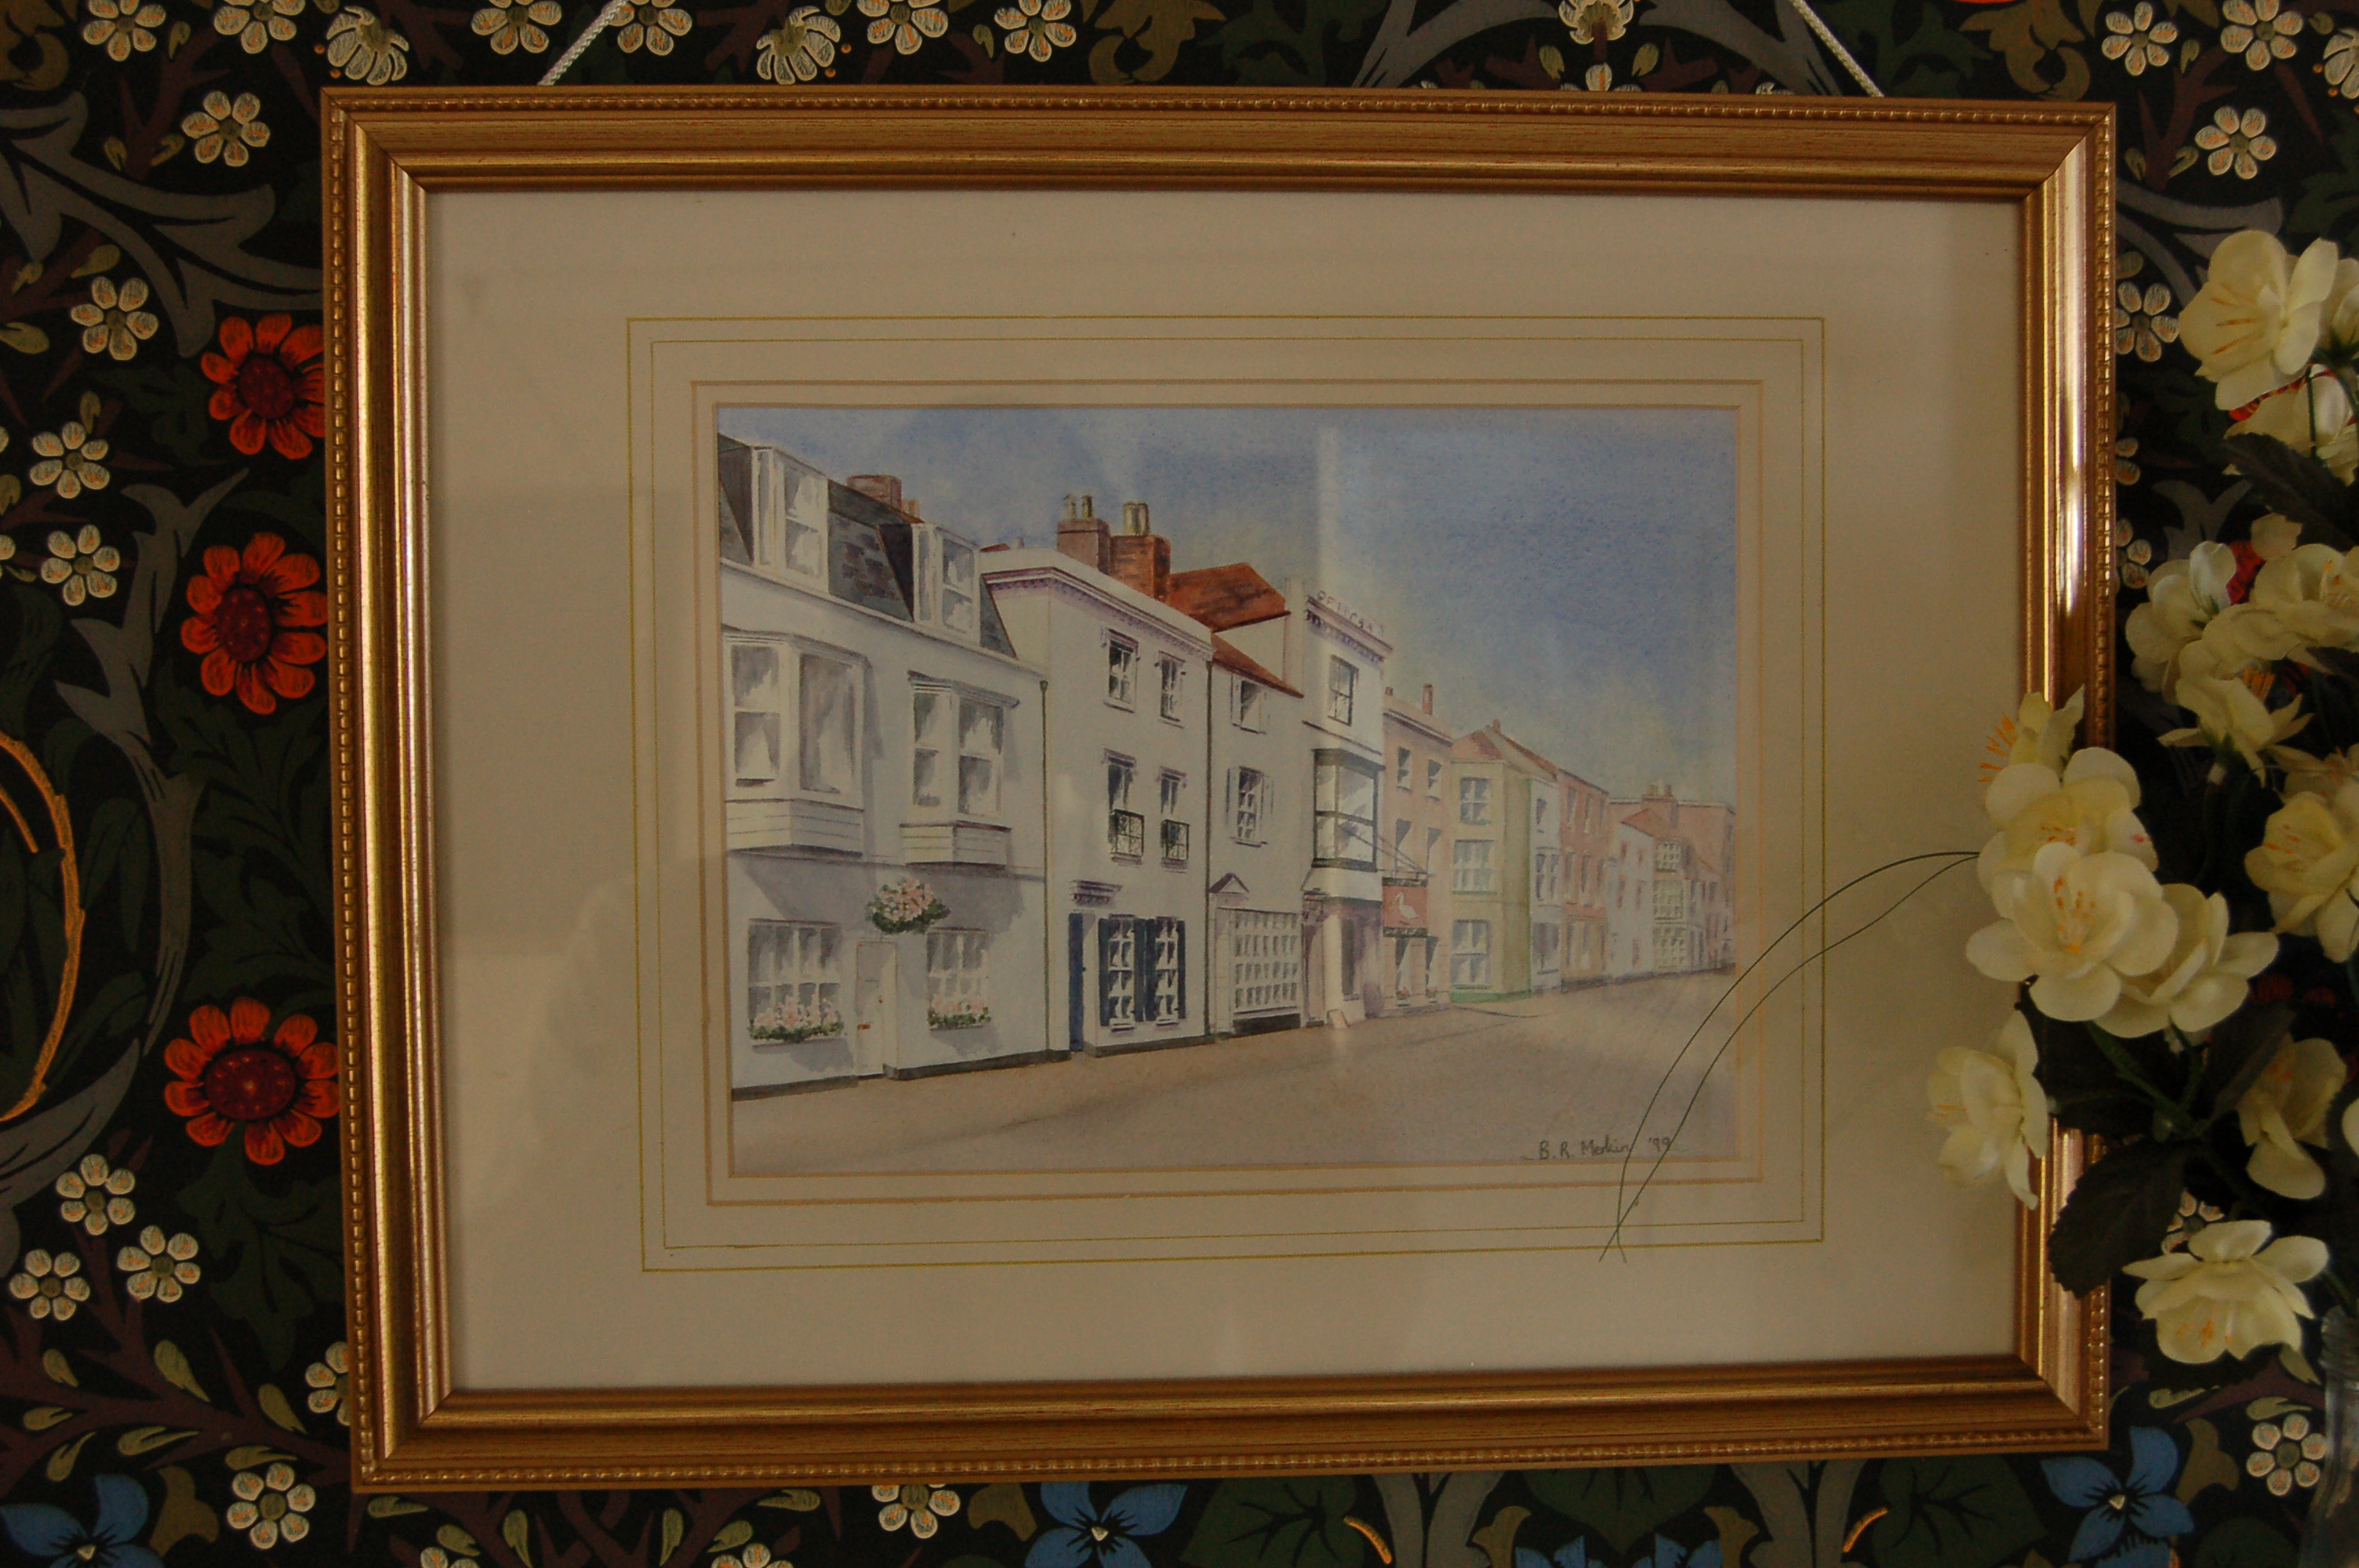 Picture by B R Merkin hanging on the wall at Beachcrest, dated 1999 - 102 years after the house and family holiday home, was bought by Thomas Bearman